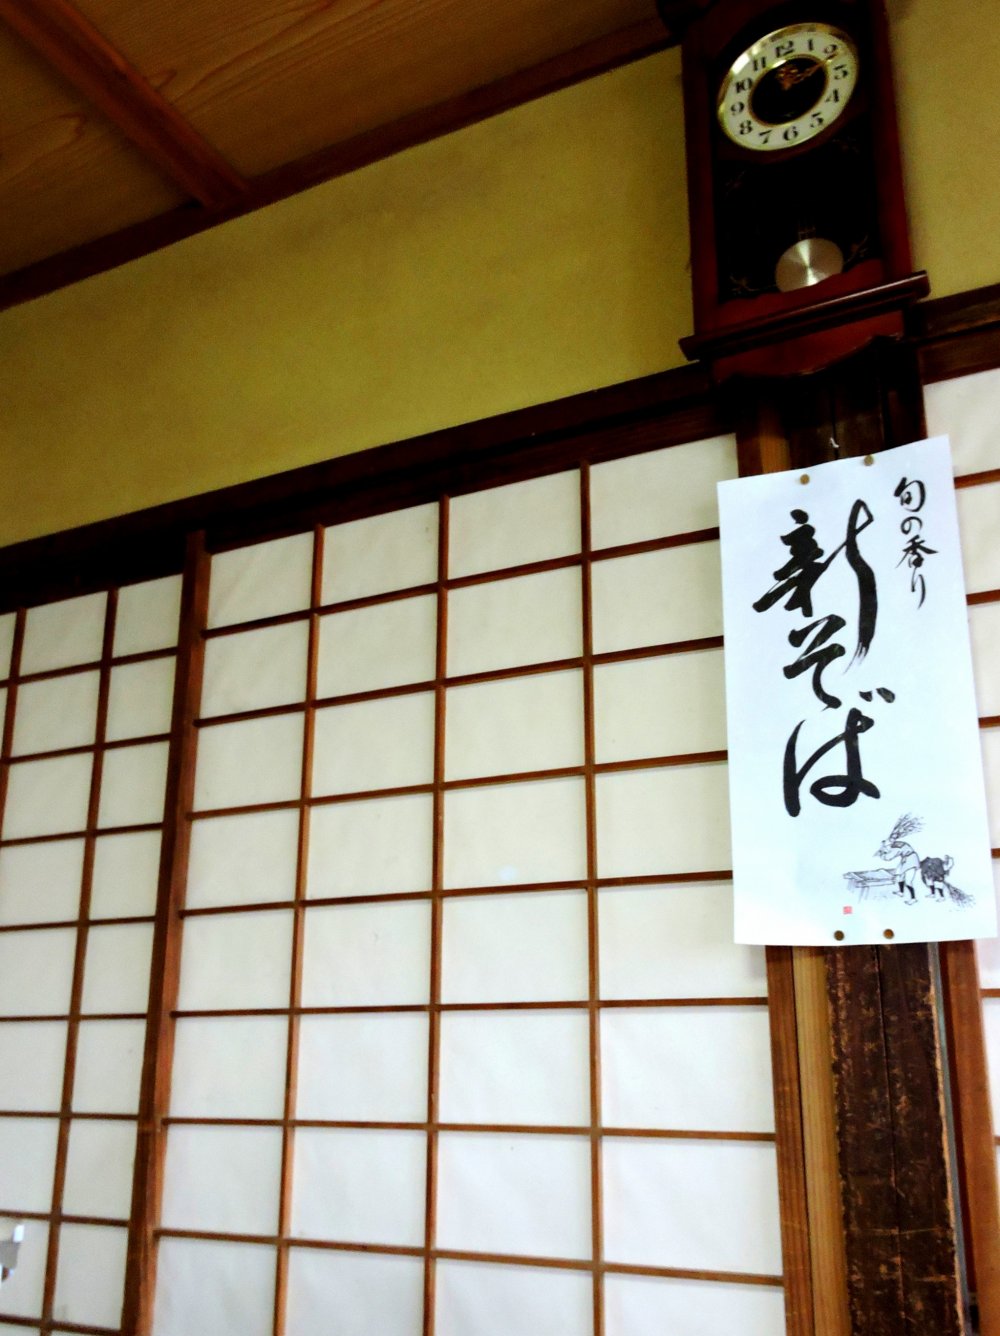 The sign says they are serving newly harvested soba